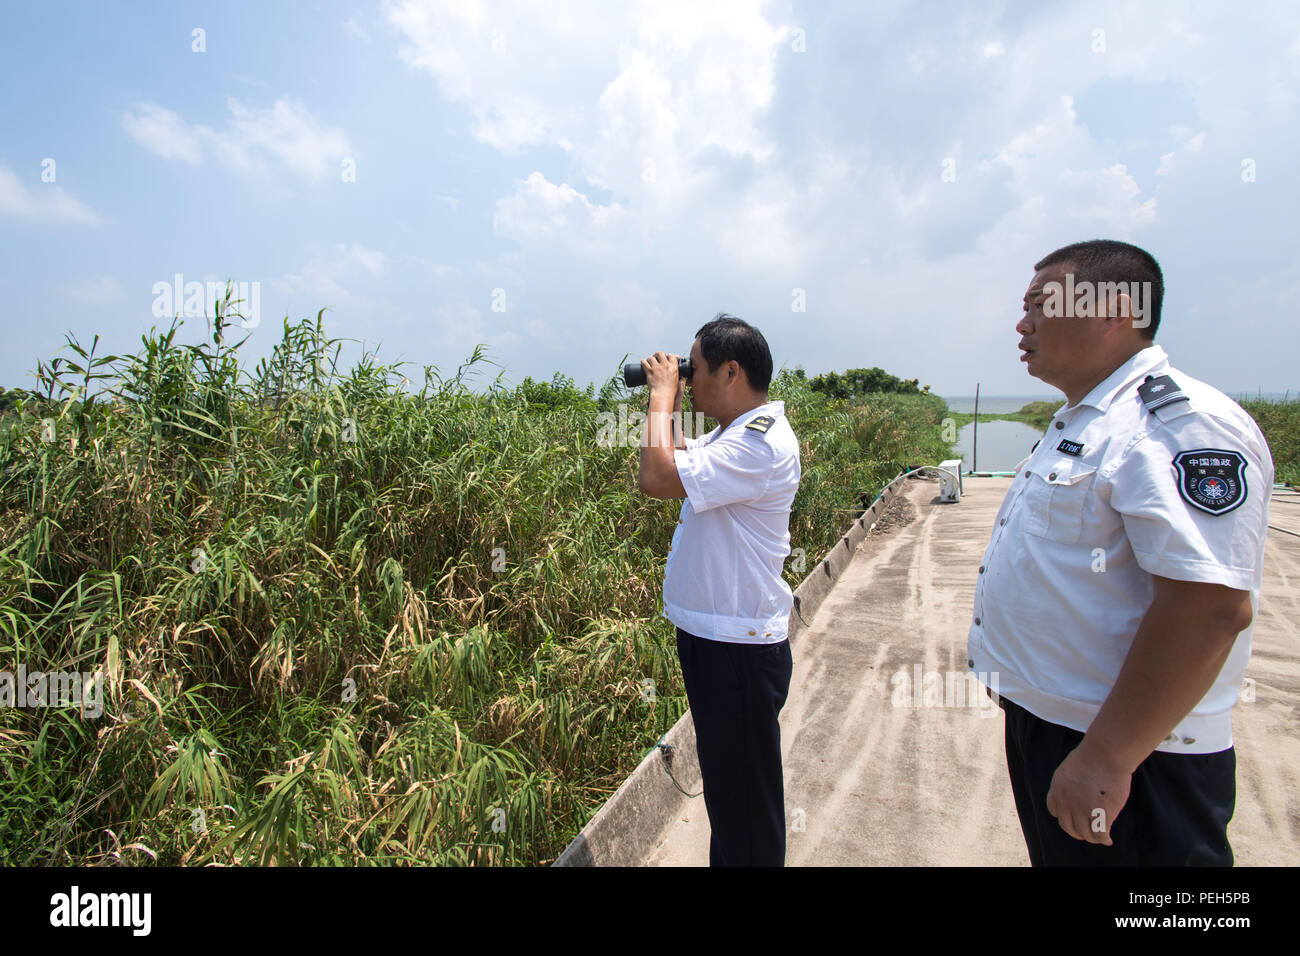 (180815) -- HONGHU, Aug. 15, 2018 (Xinhua) -- Staff members of the Xiaogang lake-patroller station observe the Honghu Lake in Honghu City, central China's Hubei Province, Aug. 15, 2018.     Honghu Lake, Hubei Province's biggest lake, is 'a place better than paradise' with abundant fish, rice, lotus and ducks, says a popular Chinese folk song.     This was true until overfishing ruined the 41,000-hectare wetland. To revive Honghu, local government has taken a series of protective measures, such as getting rid of all the fences and nets used to trap fish, monitoring water quality and using treat Stock Photo